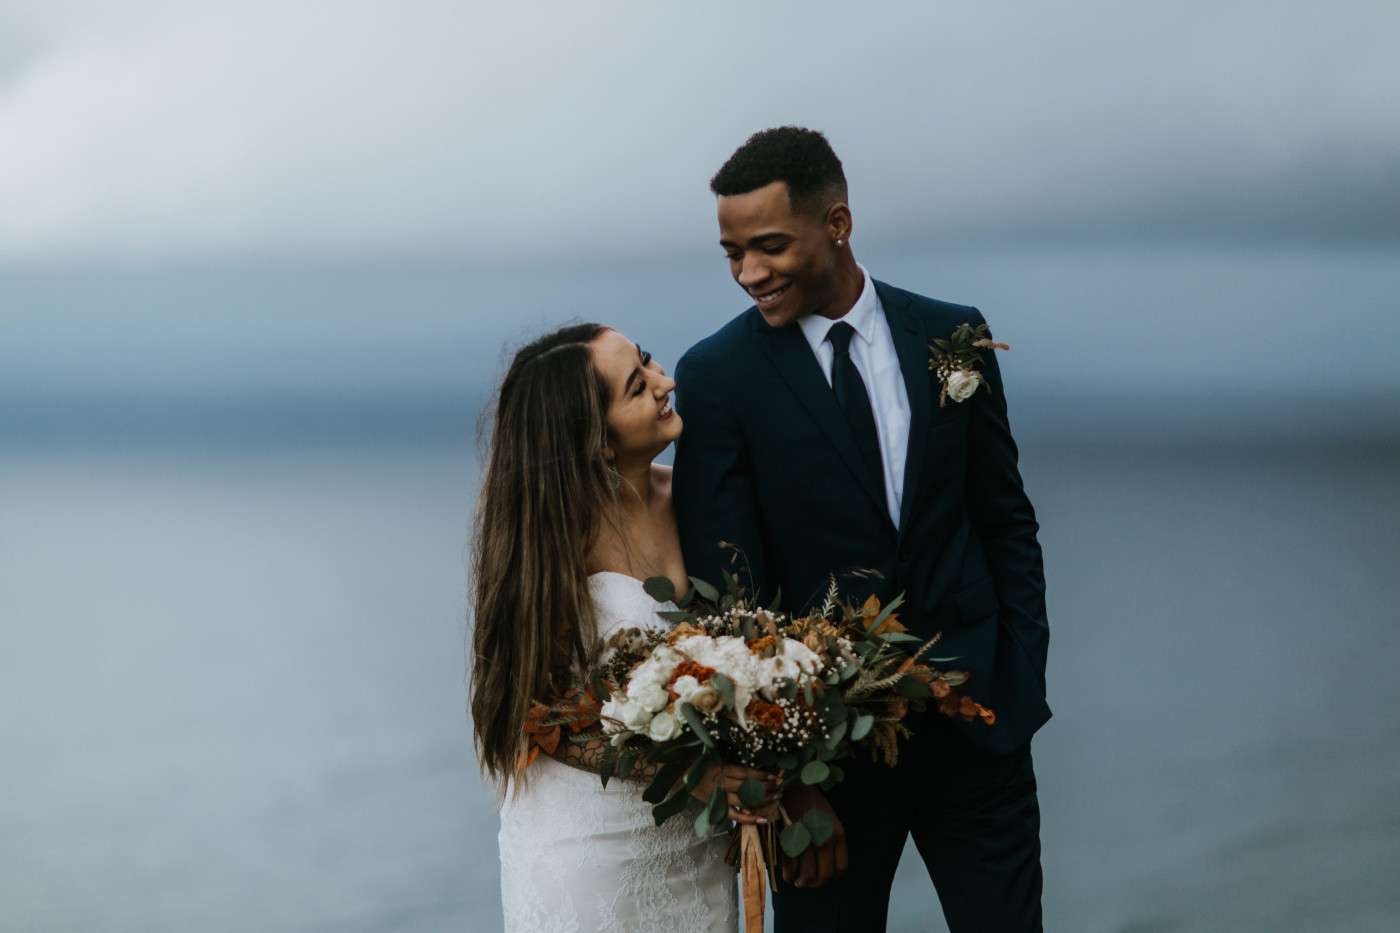 Deandre and Ariana smile together. Elopement photography at Mount Hood by Sienna Plus Josh.